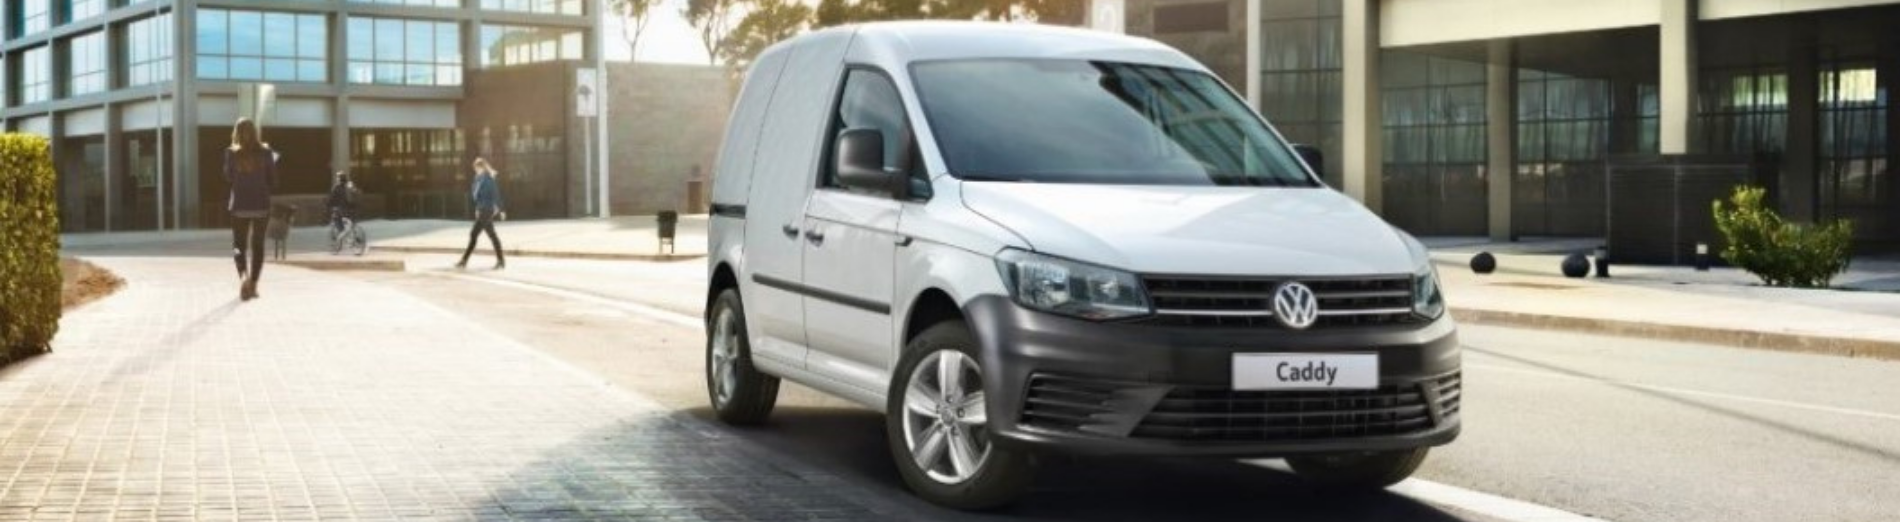 Volkswagen Commercial Vehicles win Safety Award at the What Van? Awards 2022